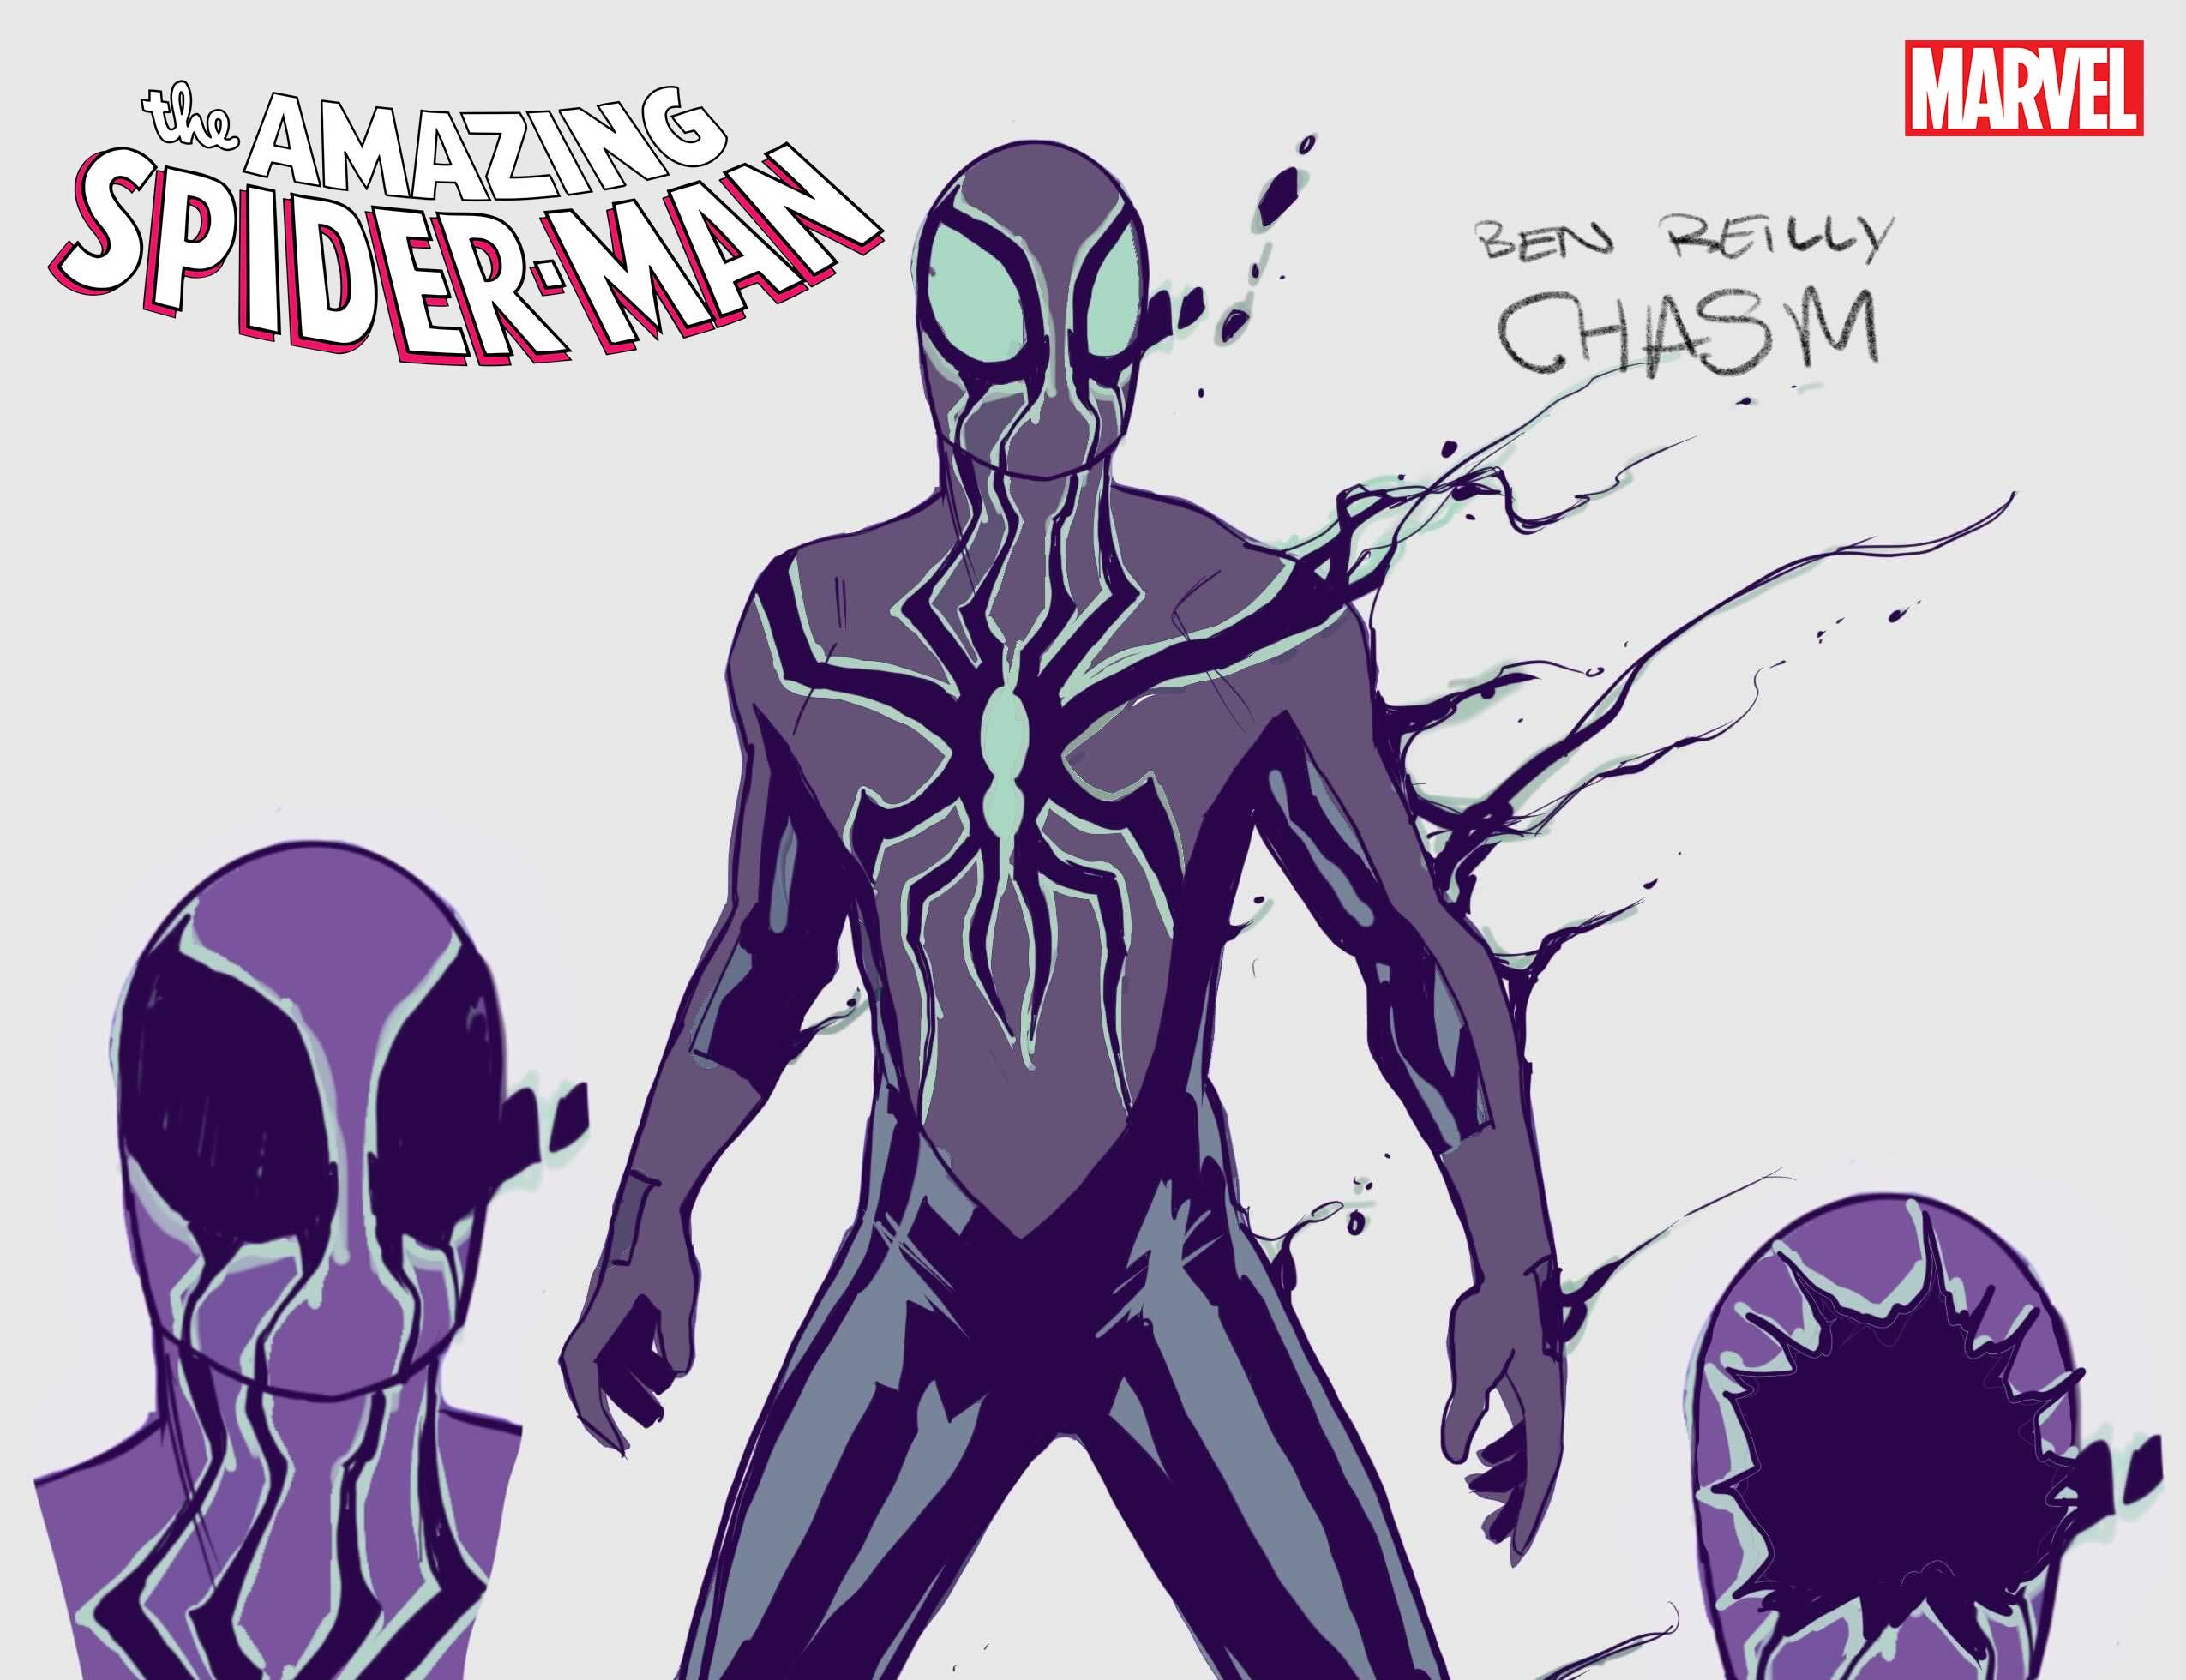 Marvel gives away 'Amazing Spider-Man' #93 ending revealing new character Chasm